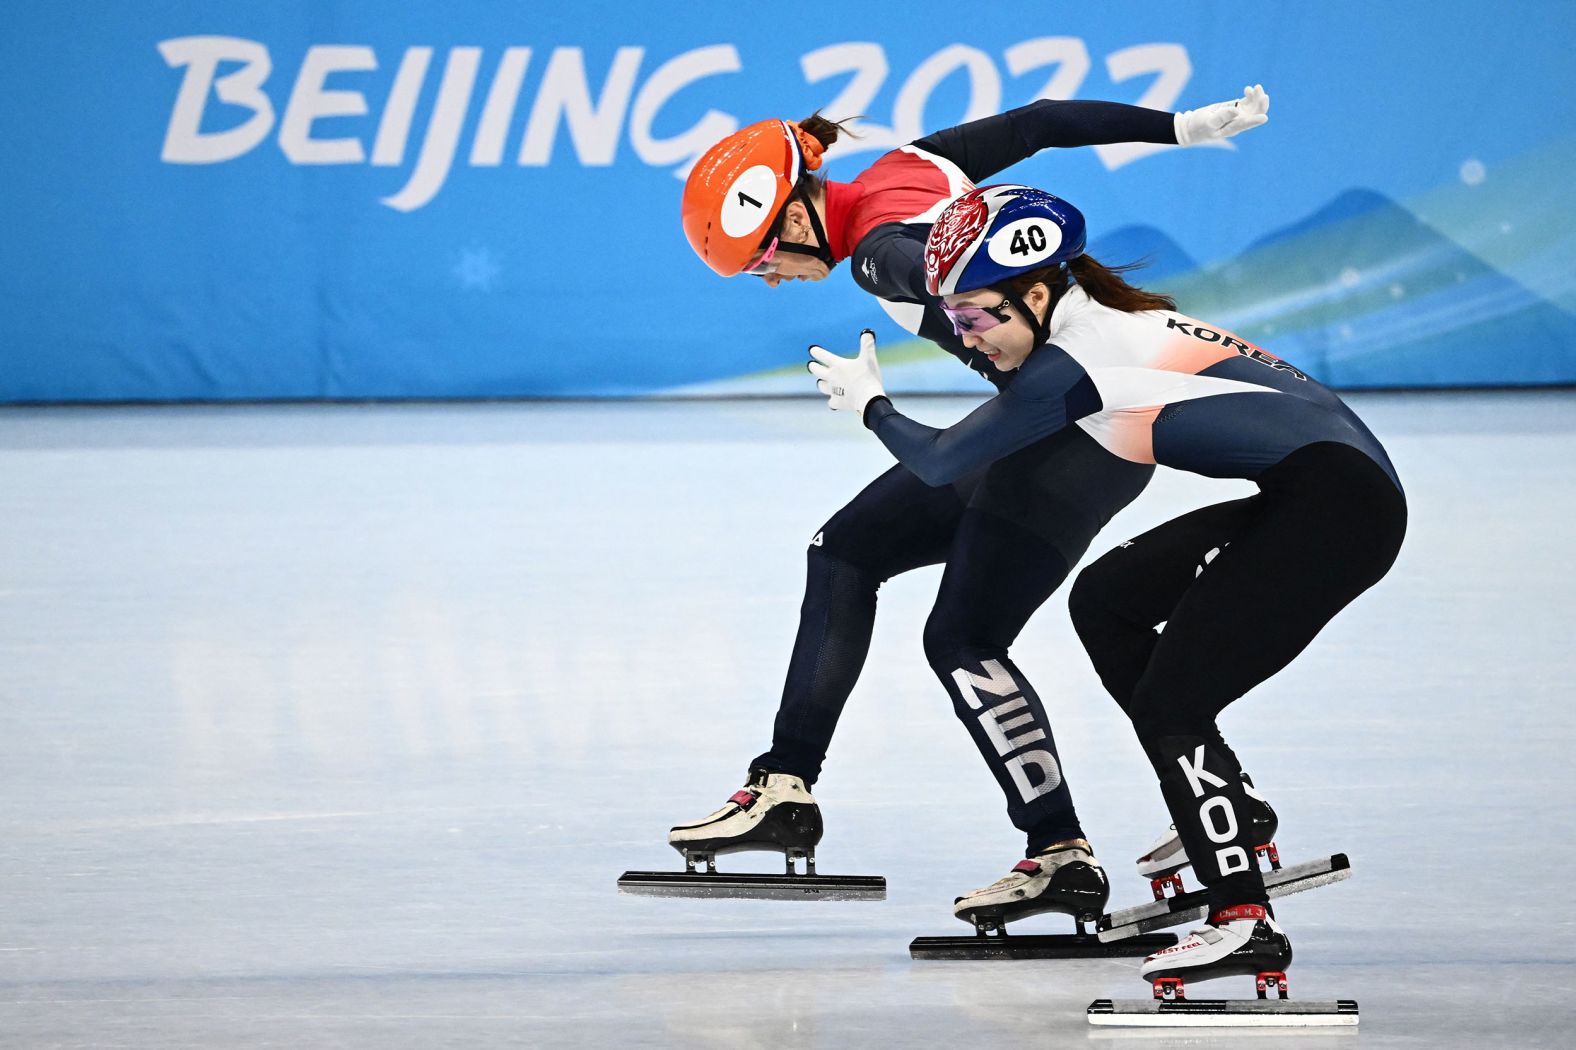 The Netherlands' Suzanne Schulting crosses the finish line just ahead of South Korea's Choi Min-jeong <a href="index.php?page=&url=https%3A%2F%2Fwww.cnn.com%2Fworld%2Flive-news%2Fbeijing-winter-olympics-02-11-22-spt%2Fh_bc26ae37dad80923d15822d265ecc381" target="_blank">to win the 1,000-meter short track final</a> on February 11. Schulting also won the event at the 2018 Olympics.